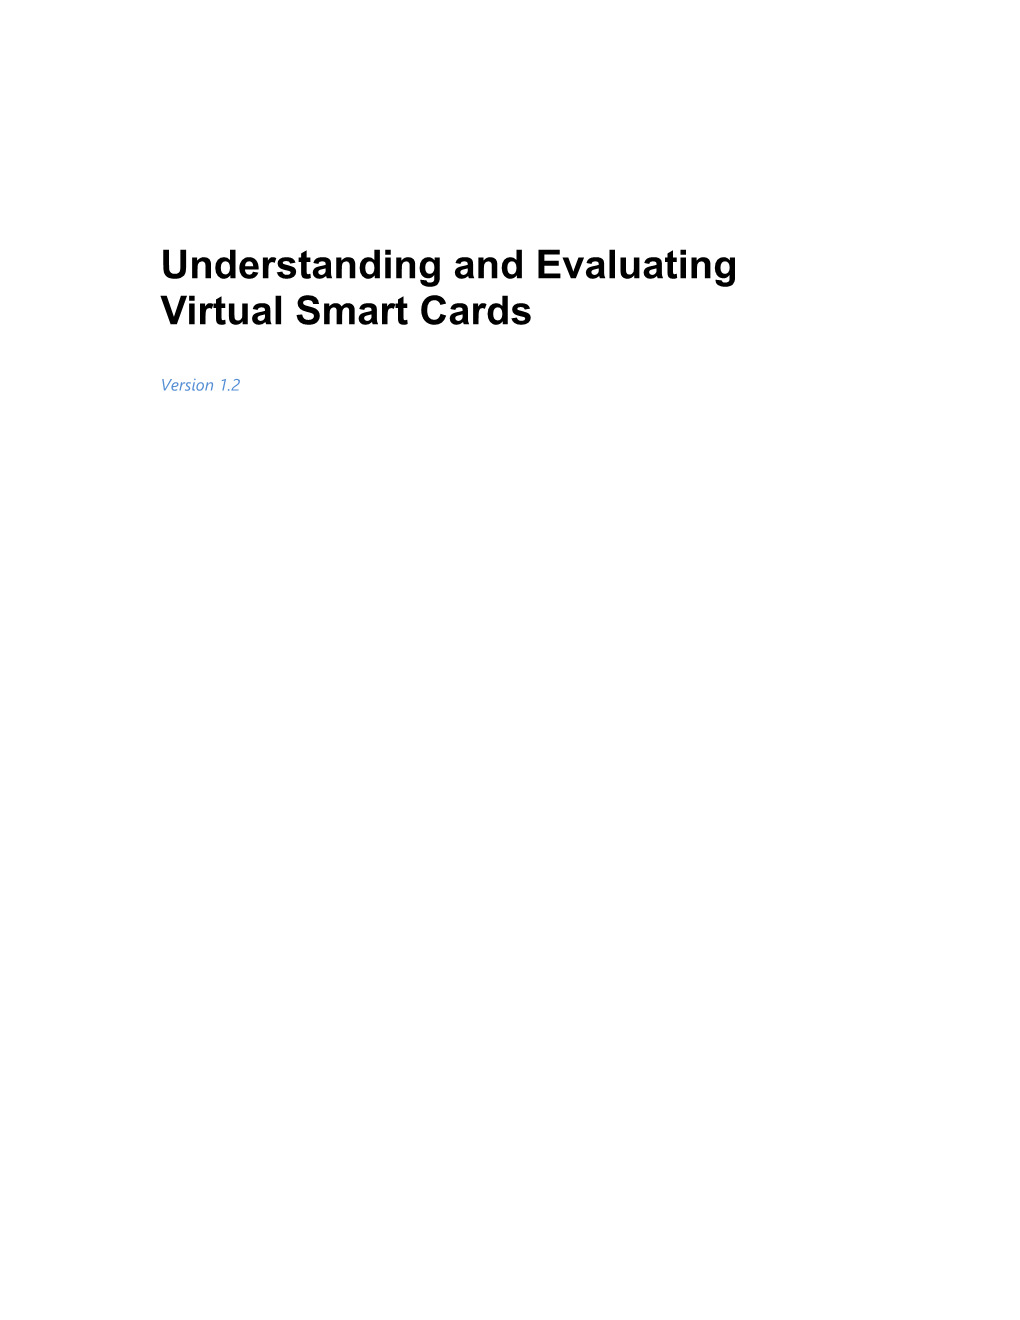 Understanding and Evaluating Virtual Smart Cards